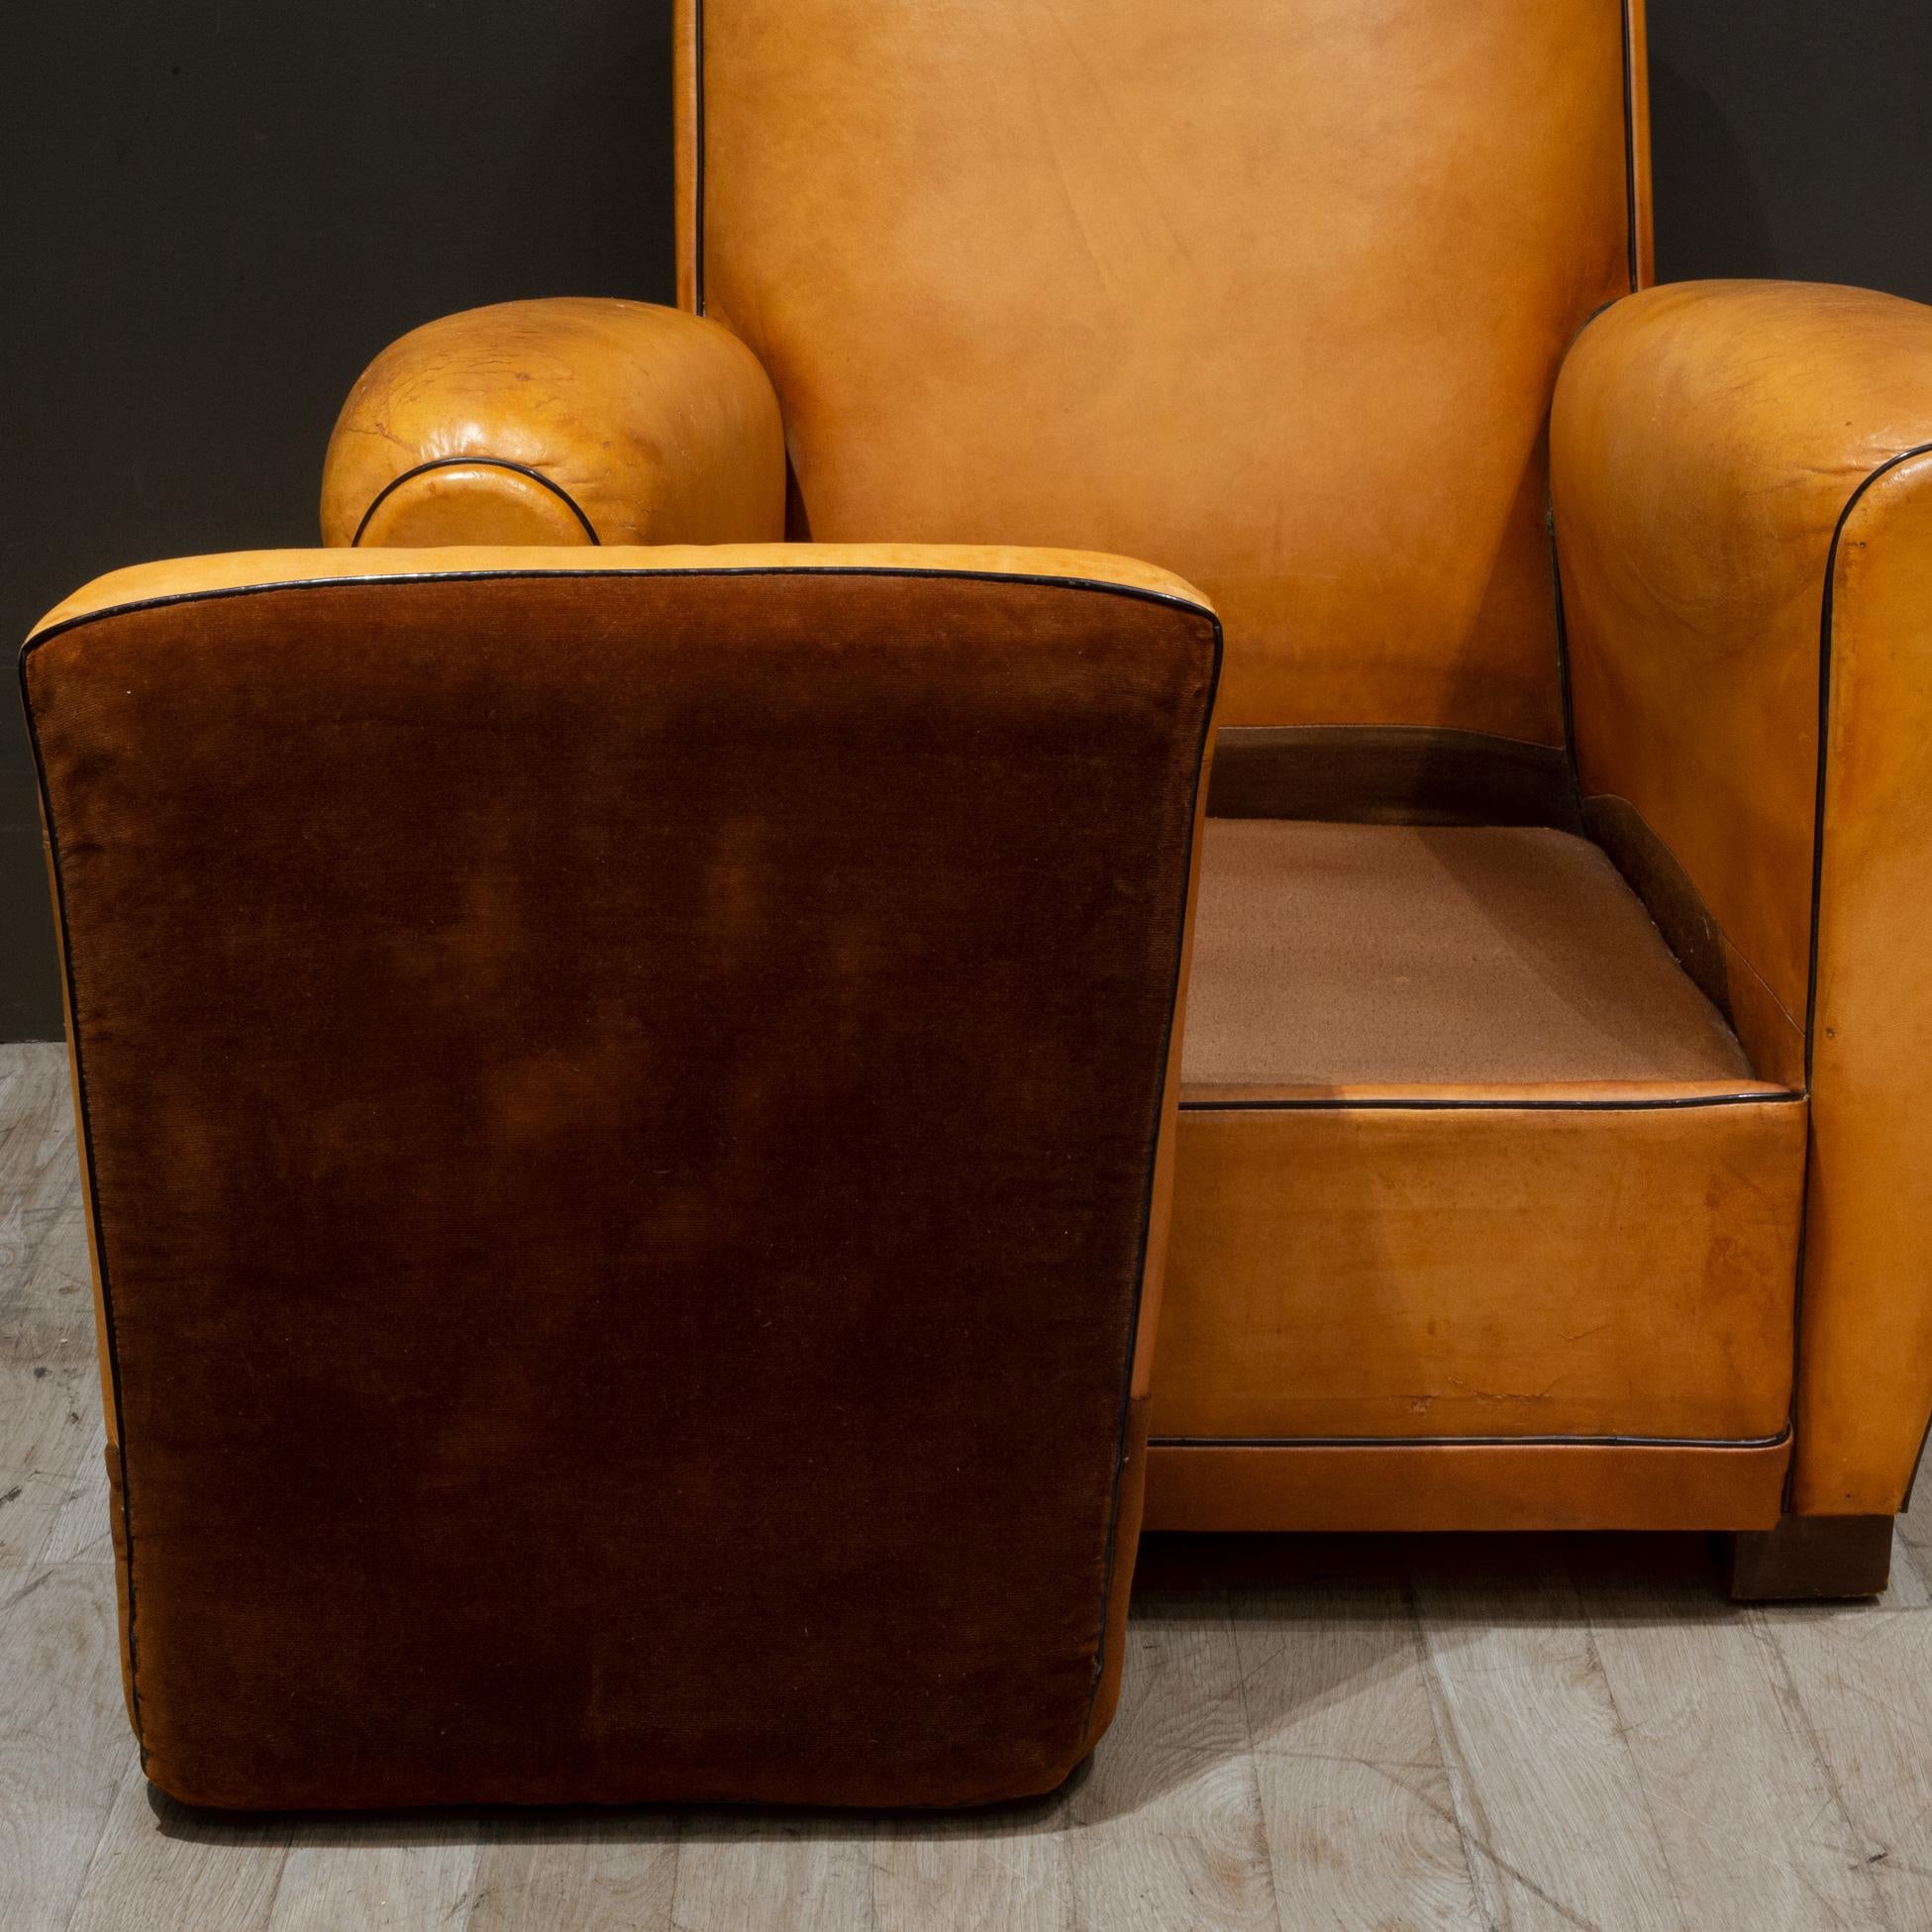 Pair of French Slopeback Light Caramel Leather Club Chairs c.1930-1940 For Sale 5